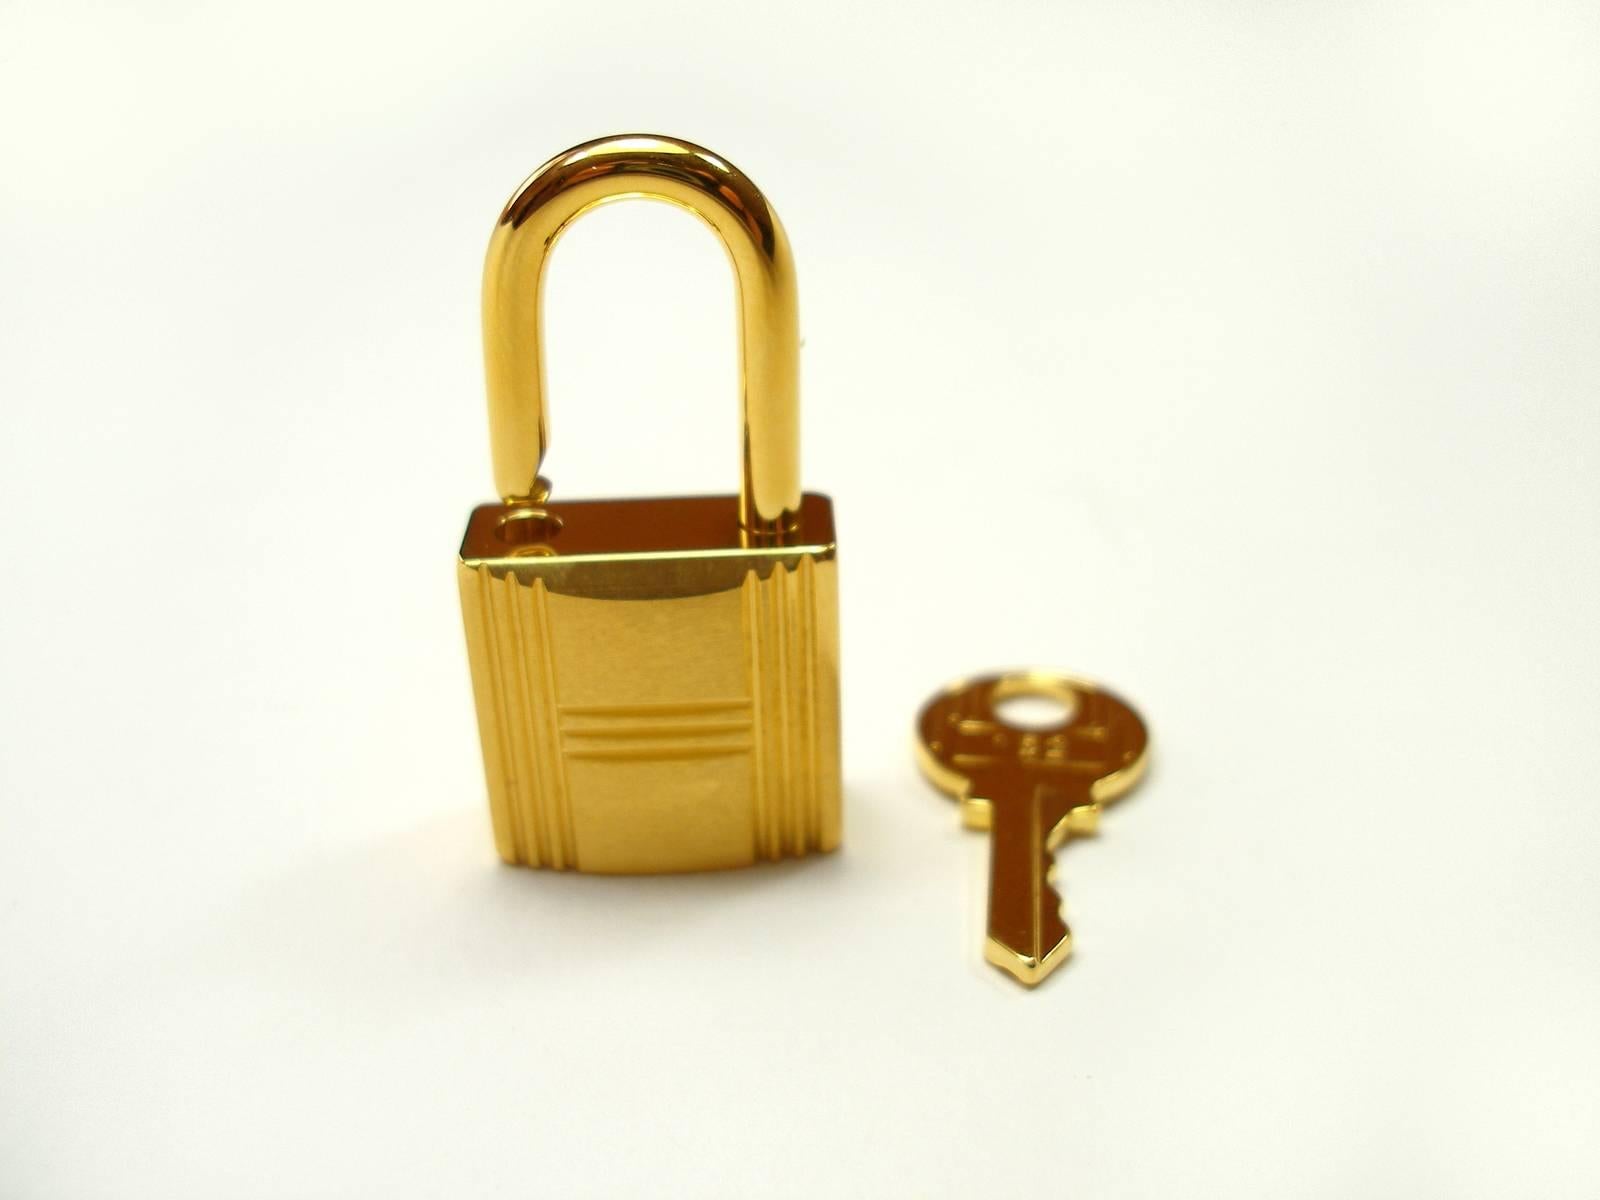 Hermès Cadenas Lock 2 Keys For Birkin or Kelly bag Gold plated shiny and brushed In Excellent Condition In VERGT, FR